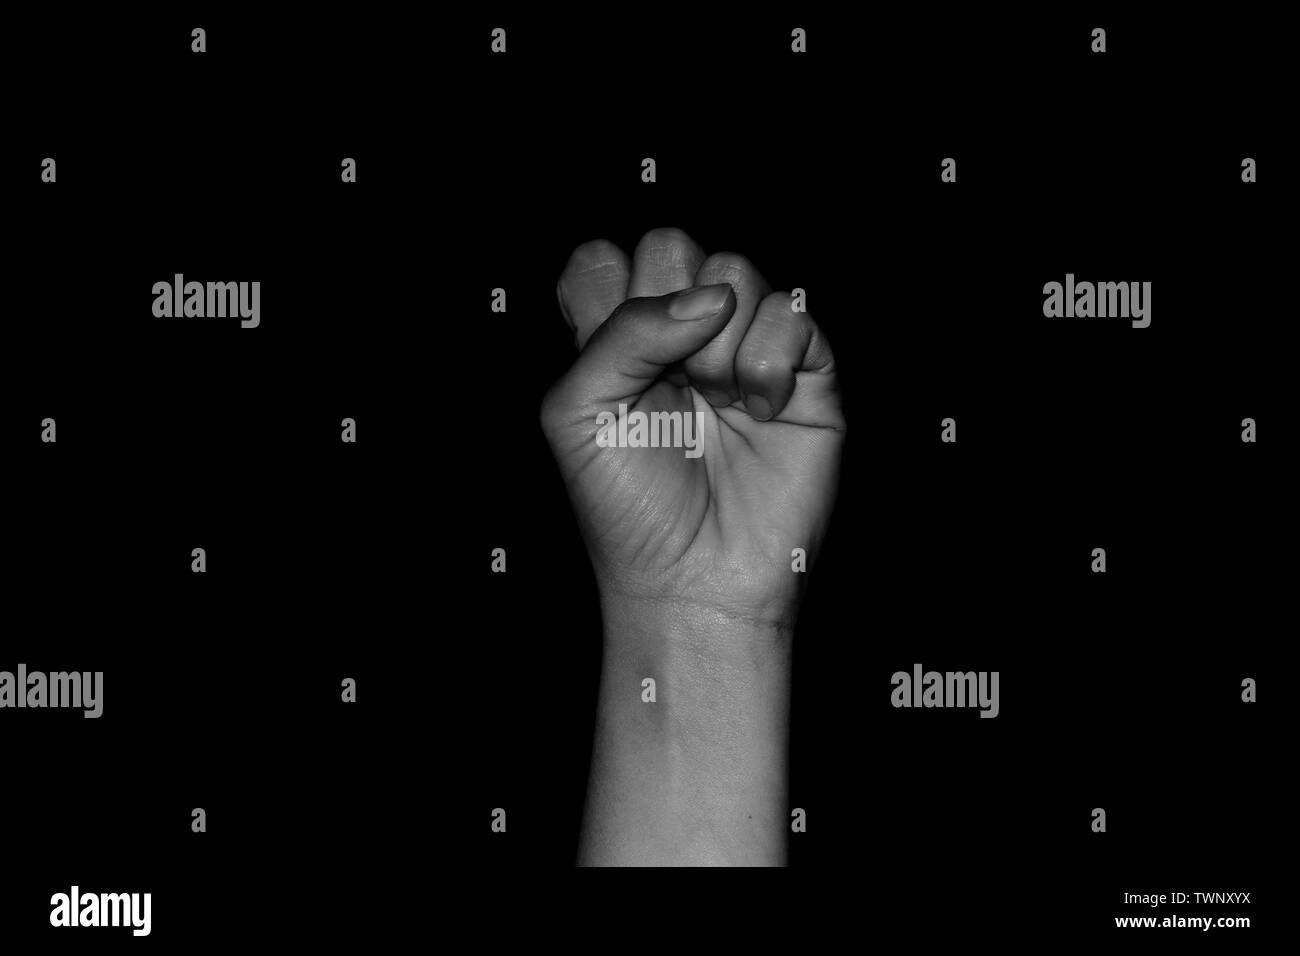 Isolated fist of woman on black background with palm facing towards camera. Showing concepts of female empowerment, revolution and strike. Stock Photo